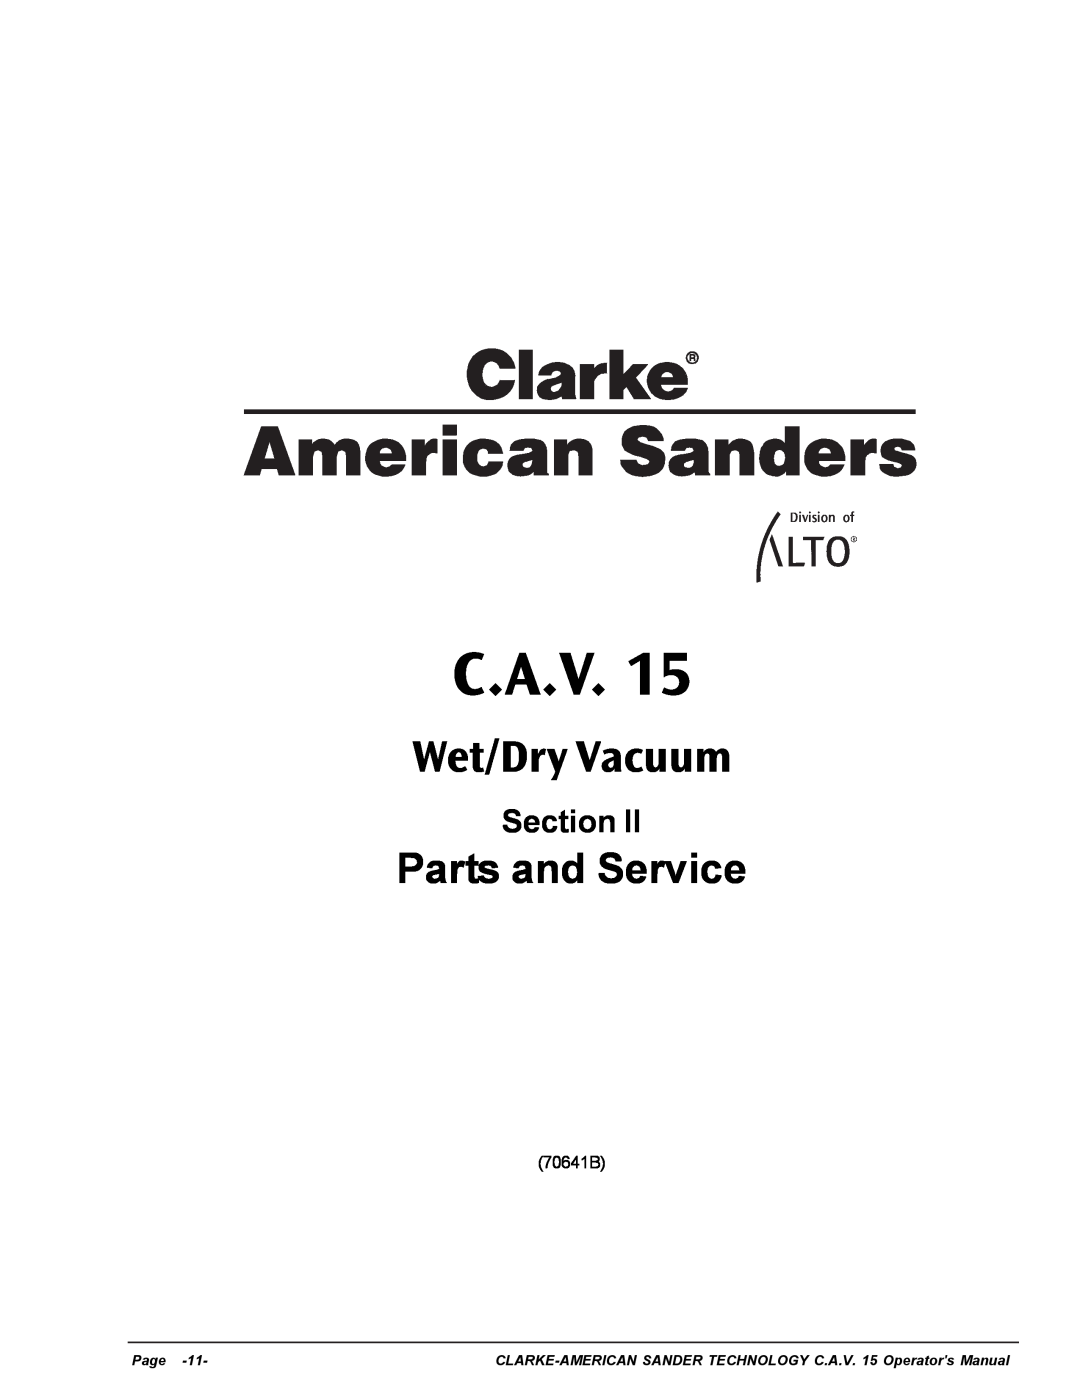 Nilfisk-ALTO C.A.V. 15 manual Parts and Service, Section, Wet/Dry Vacuum, 70641B, Clarke, American Sanders, Page 